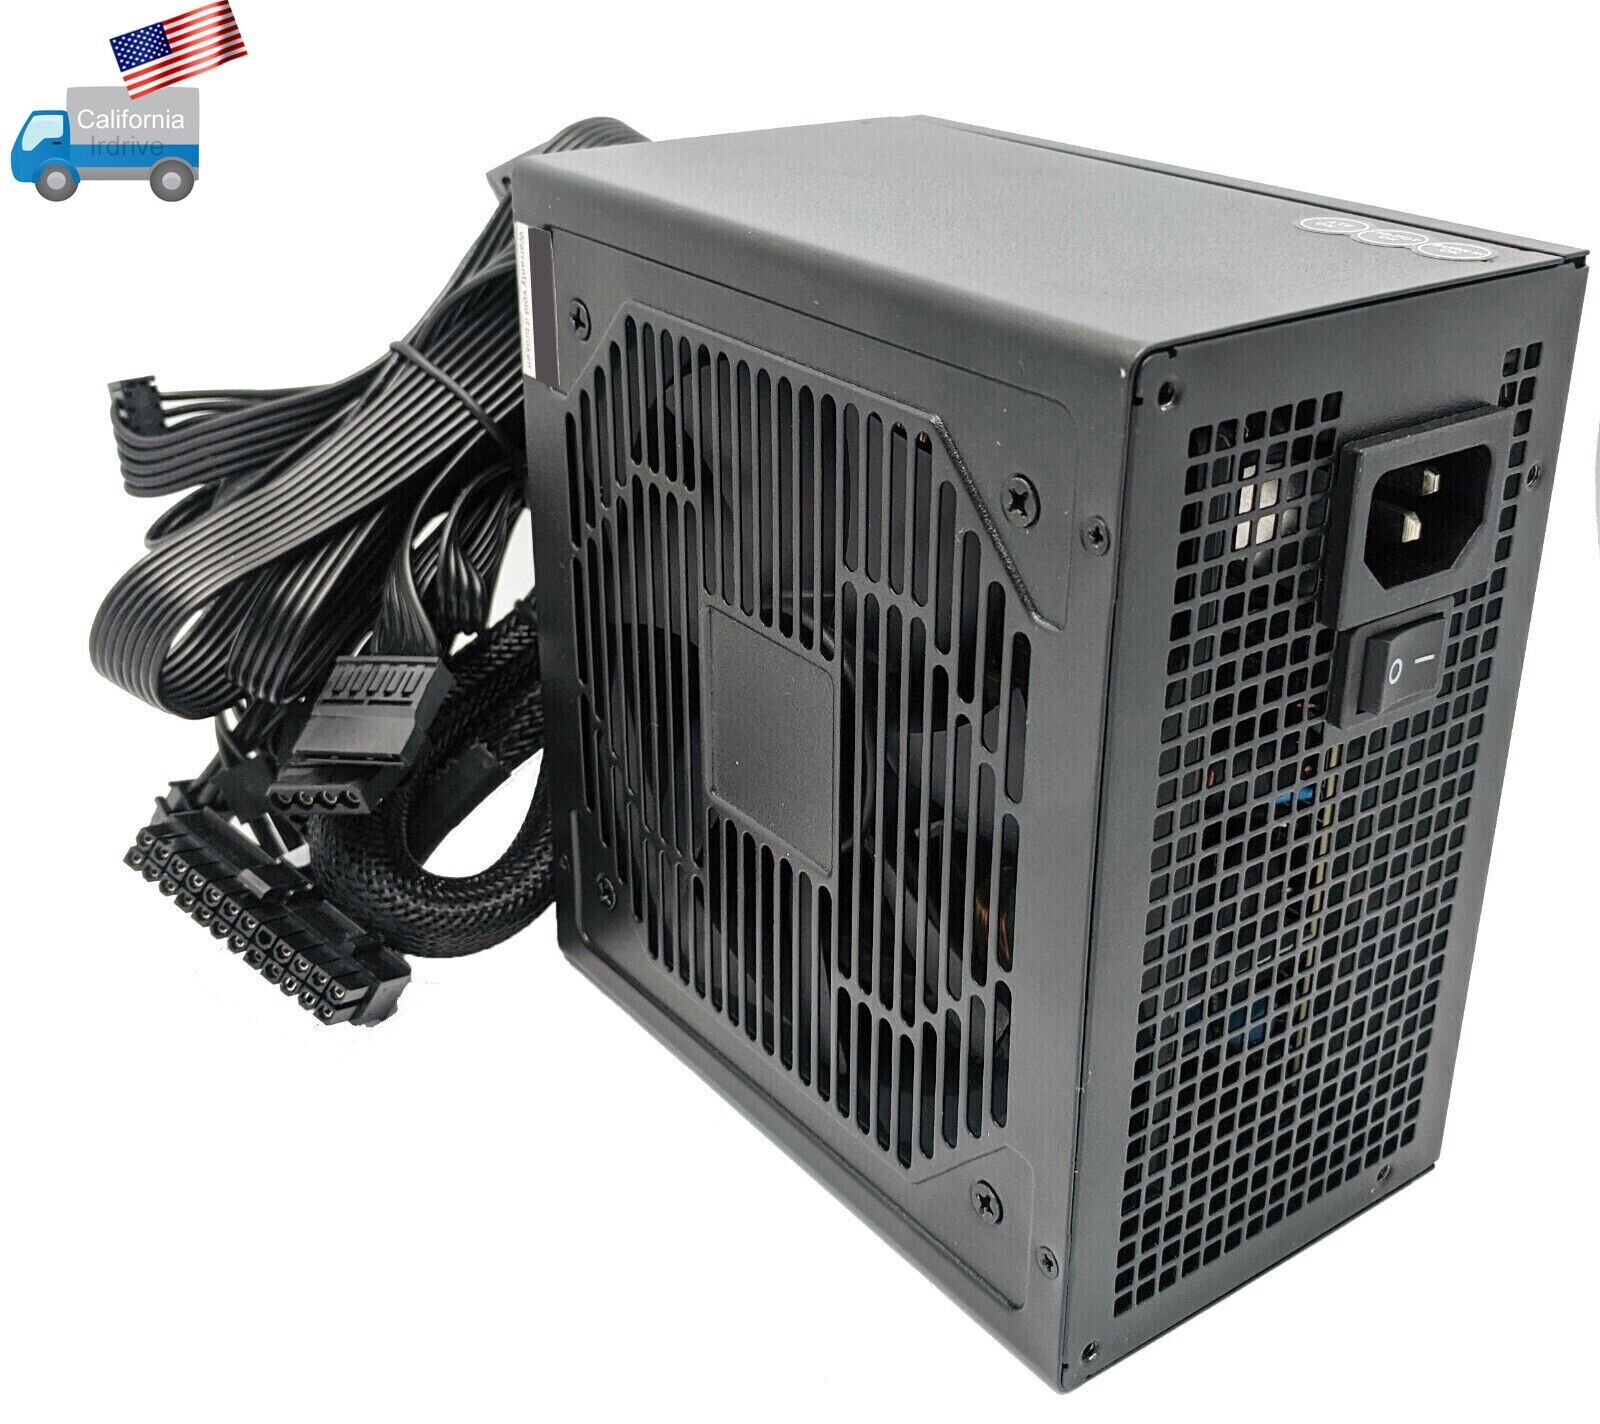 NEW 500W Upgrade Power Supply for Dell Dimension 4600 4700 9100 9150 9200 F4284